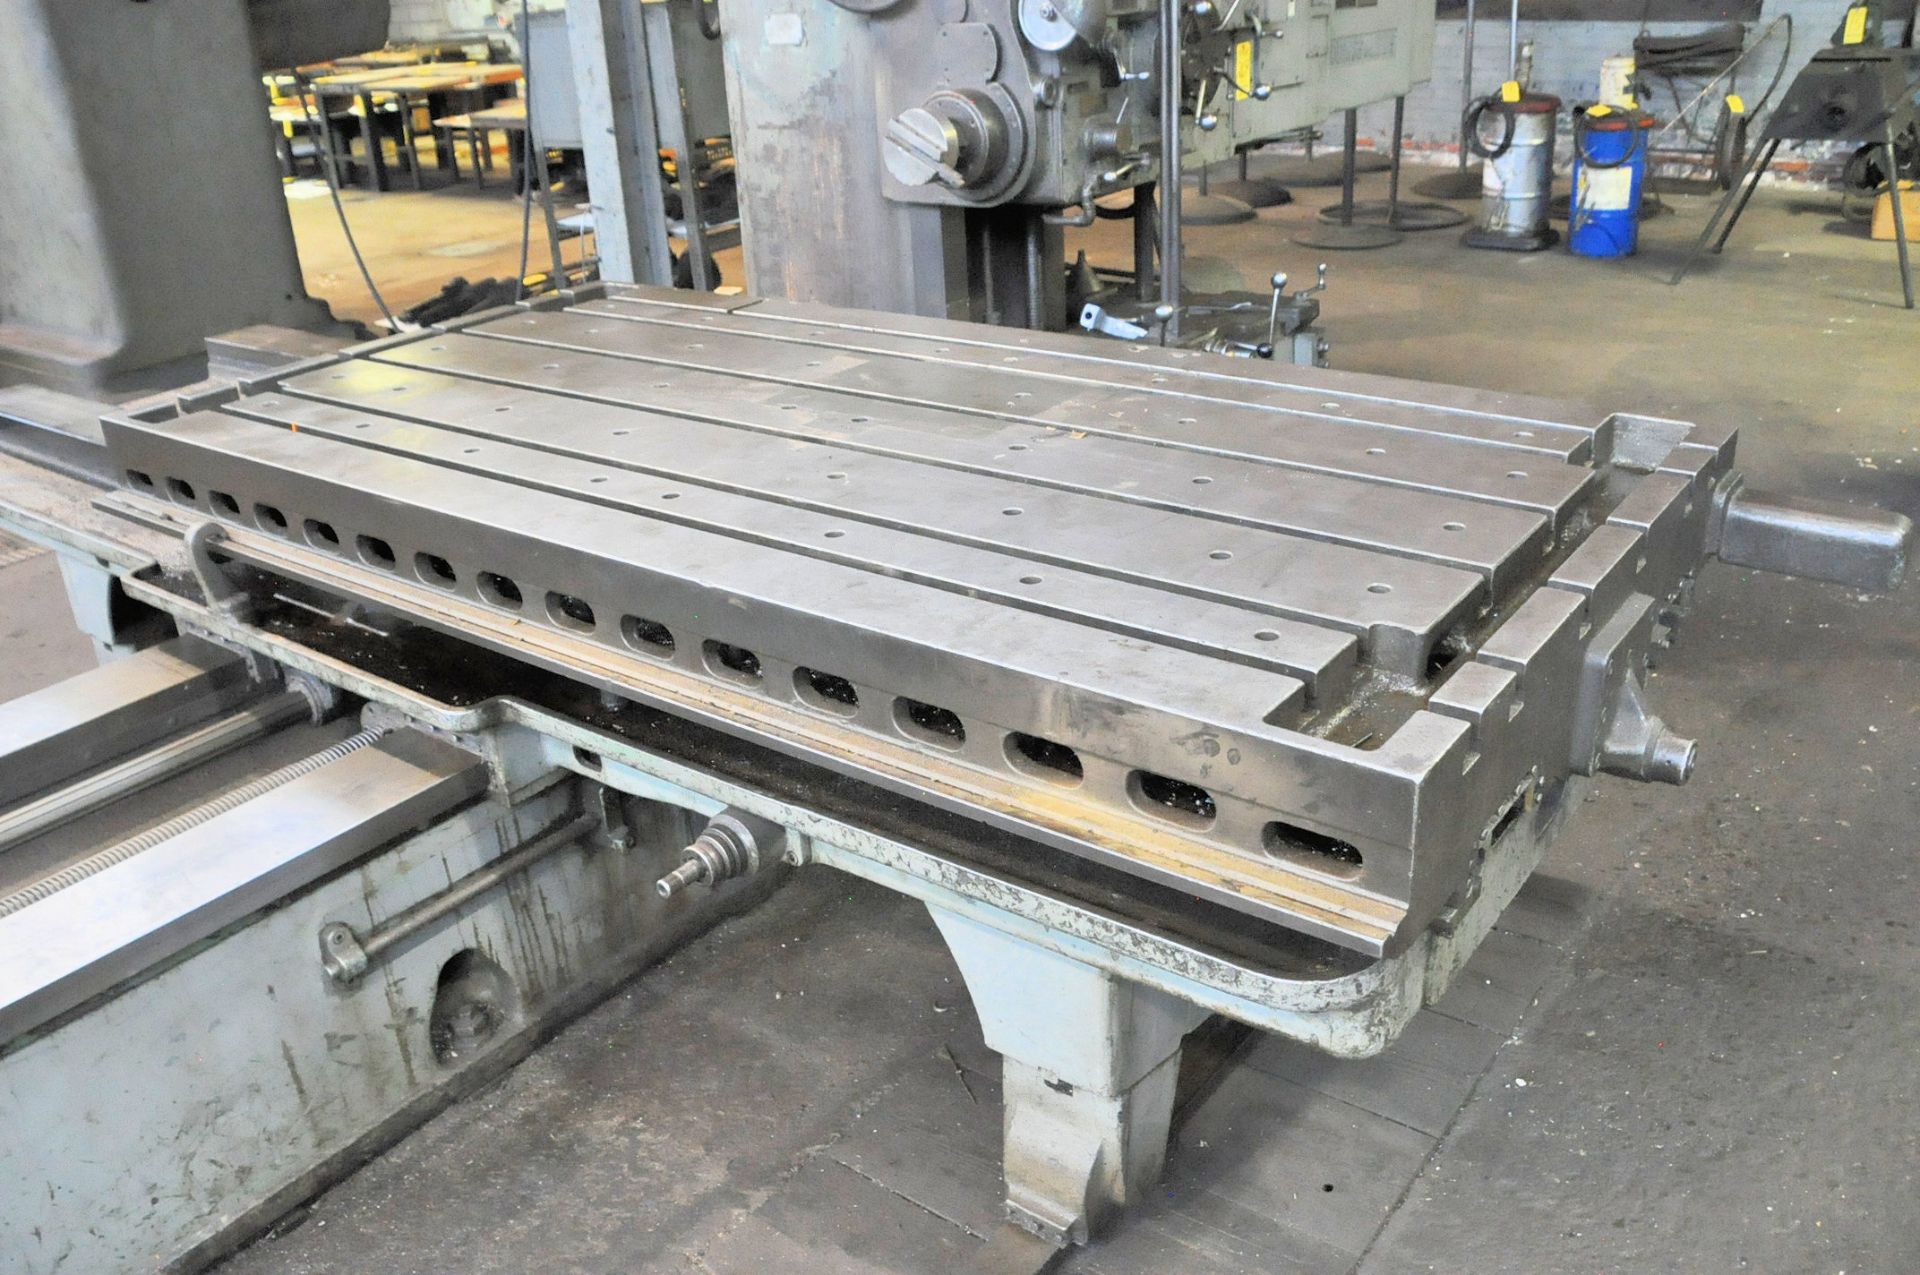 Giddings & Lewis Model 340T 4" Spindle Table Type Horizontal Boring Mill, S/N 150-316-58, 48" X - Image 5 of 7